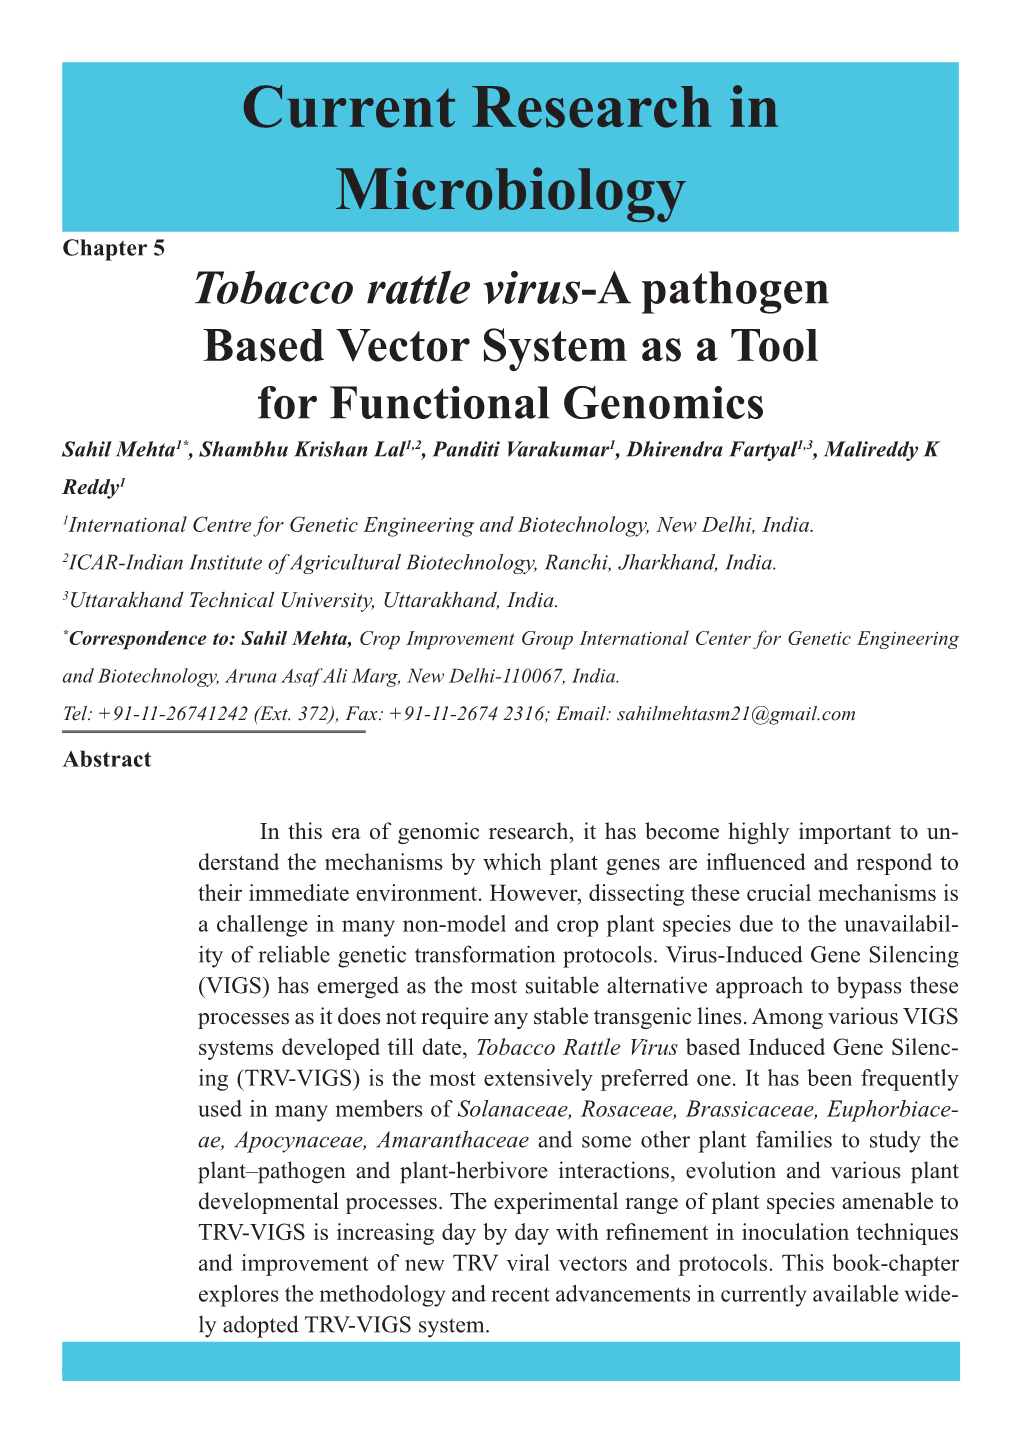 Tobacco Rattle Virus-A Pathogen Based Vector System As a Tool For